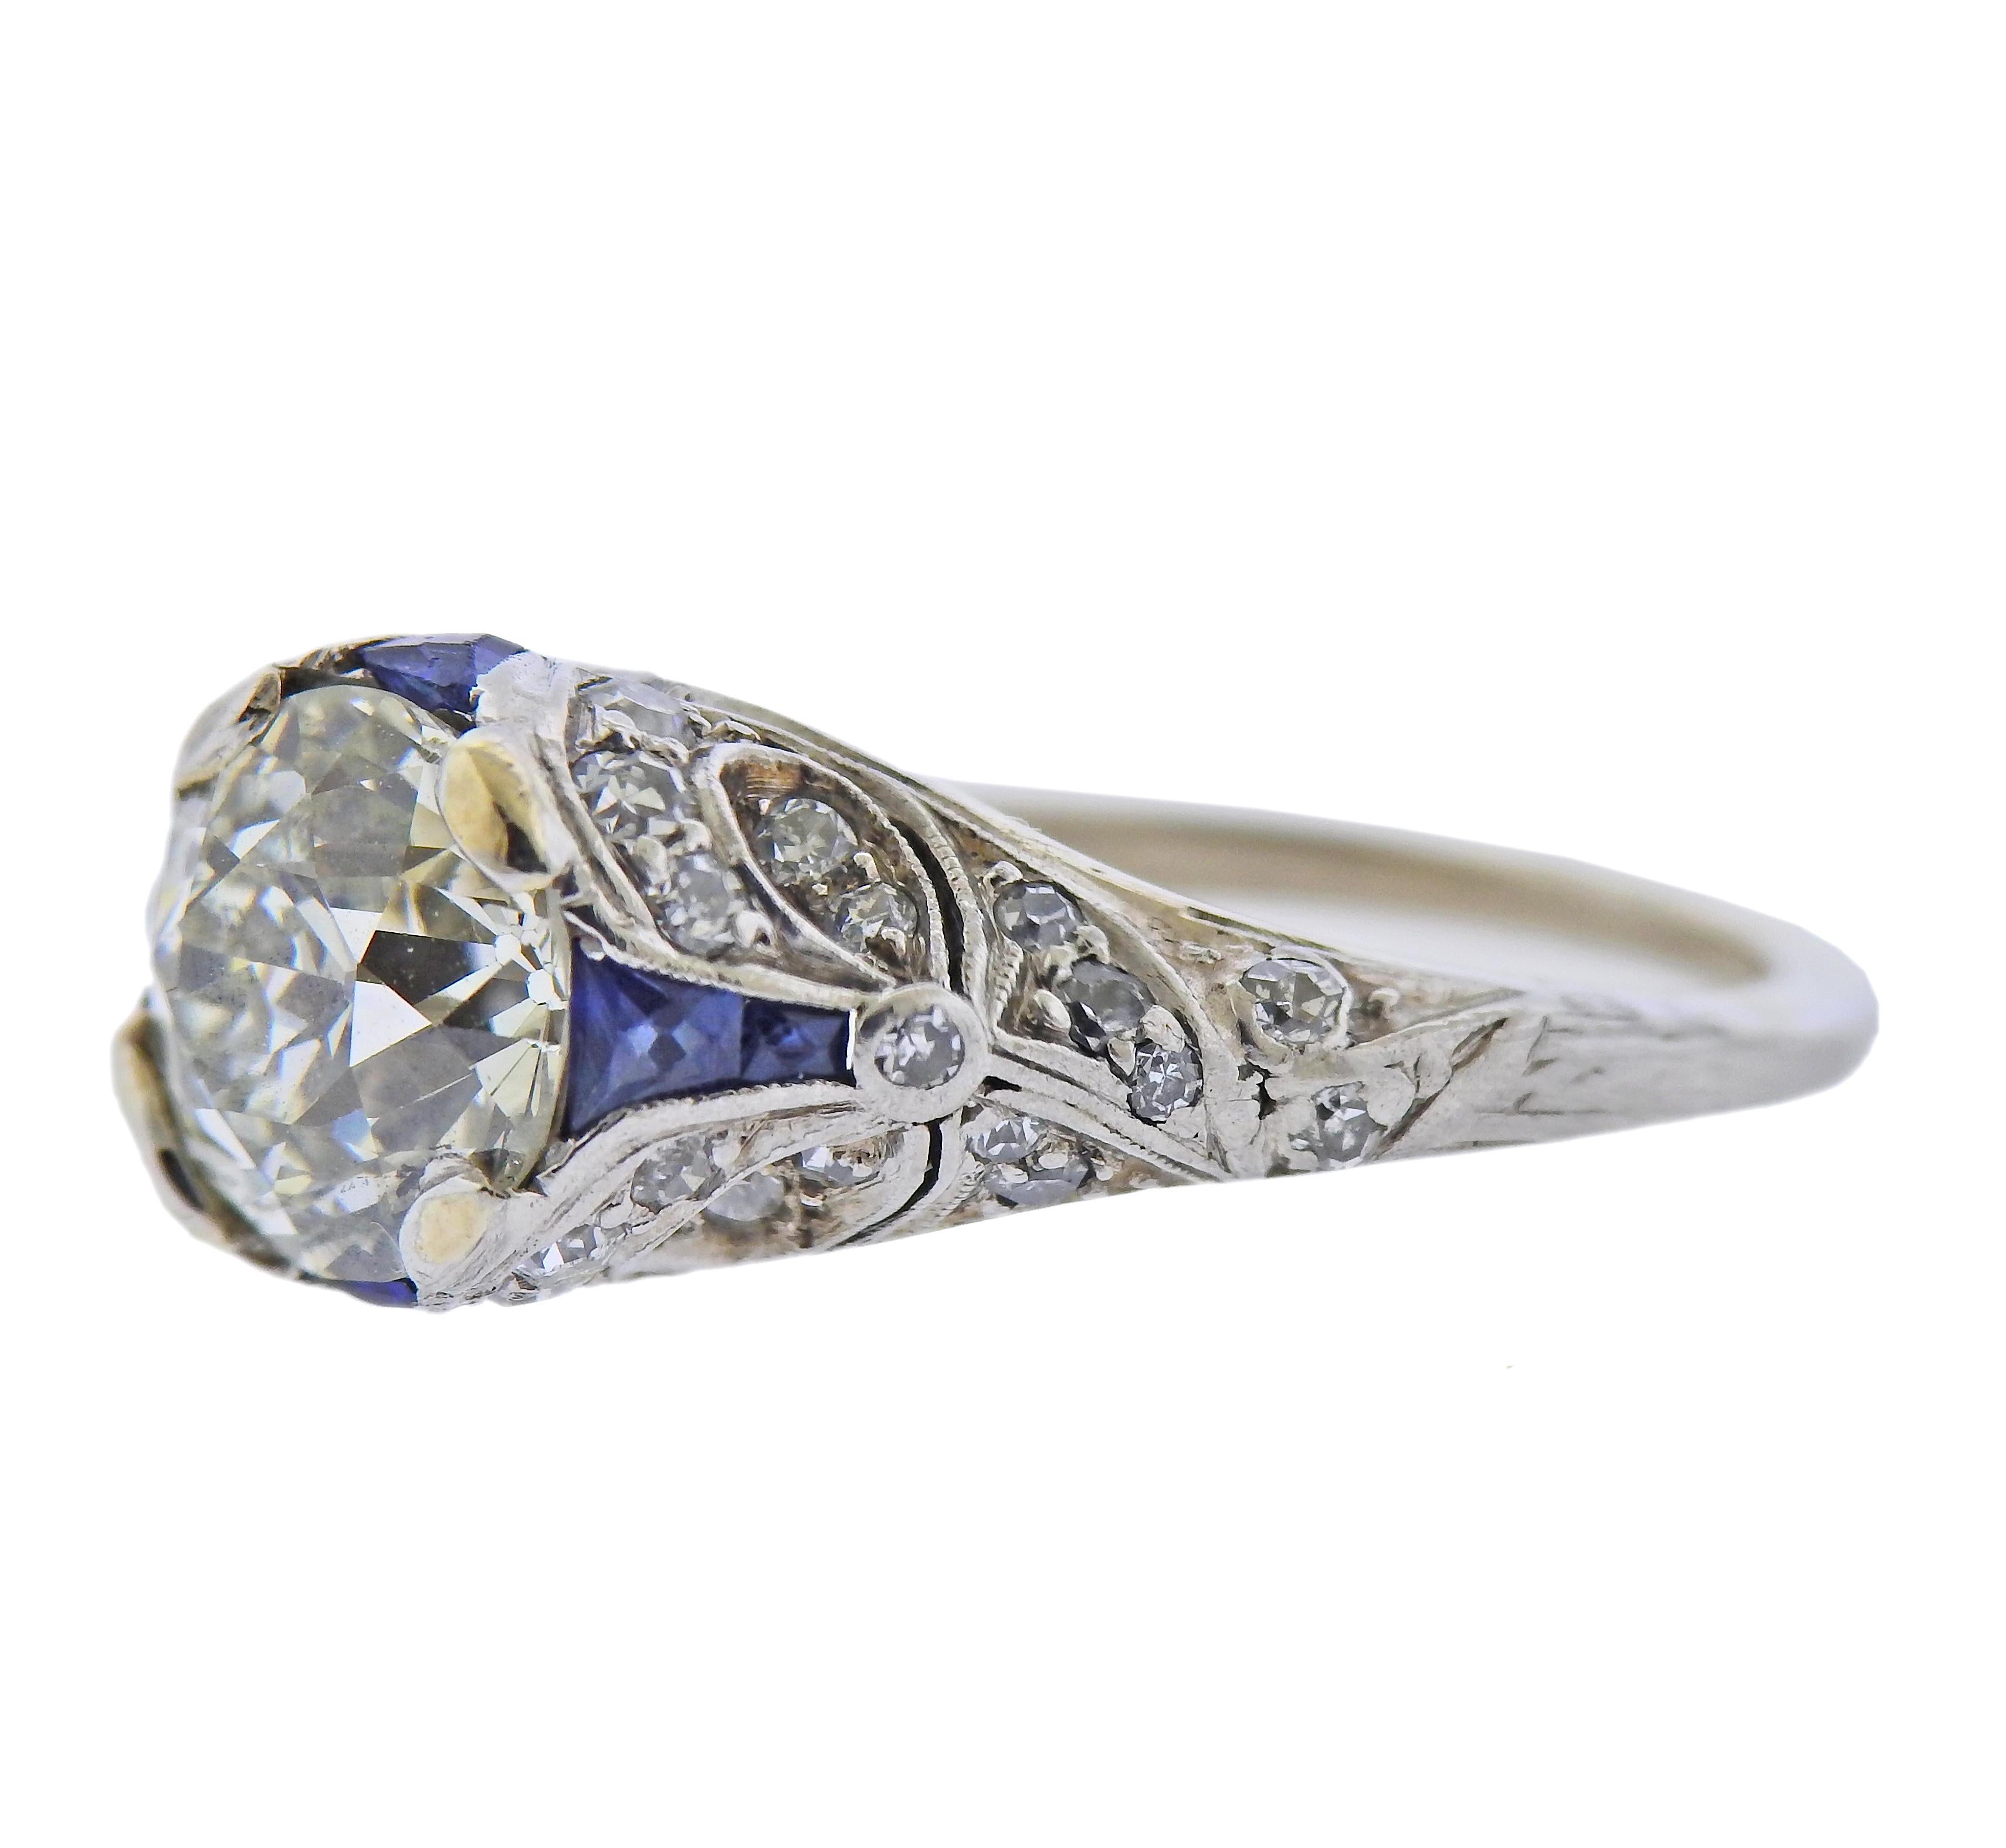 Art Deco platinum engagement ring, with center old European diamond approx. 2.48ct K-L/SI1-SI2. With side diamonds and sapphires. Ring size - 5.5, ring top - 9.7mm wide. Weight - 5.6 grams. 